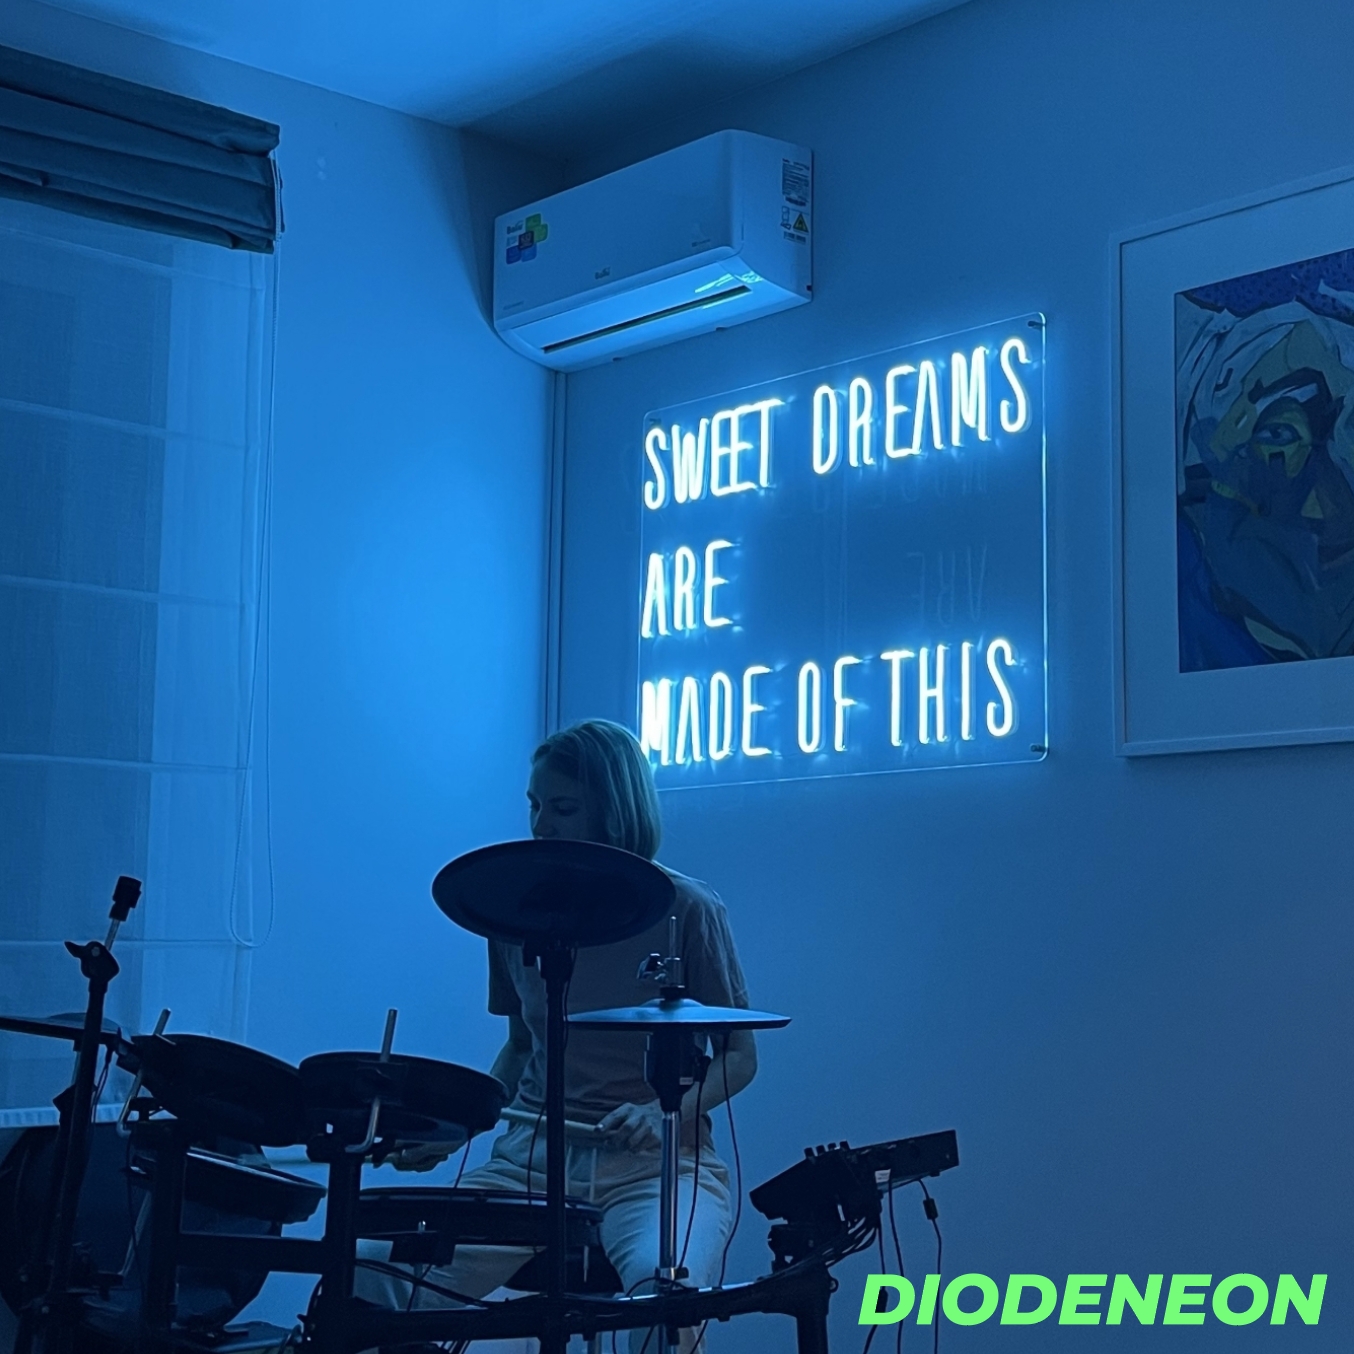 Неоновый LED светильник DIODENEON Sweet dreams are made of this